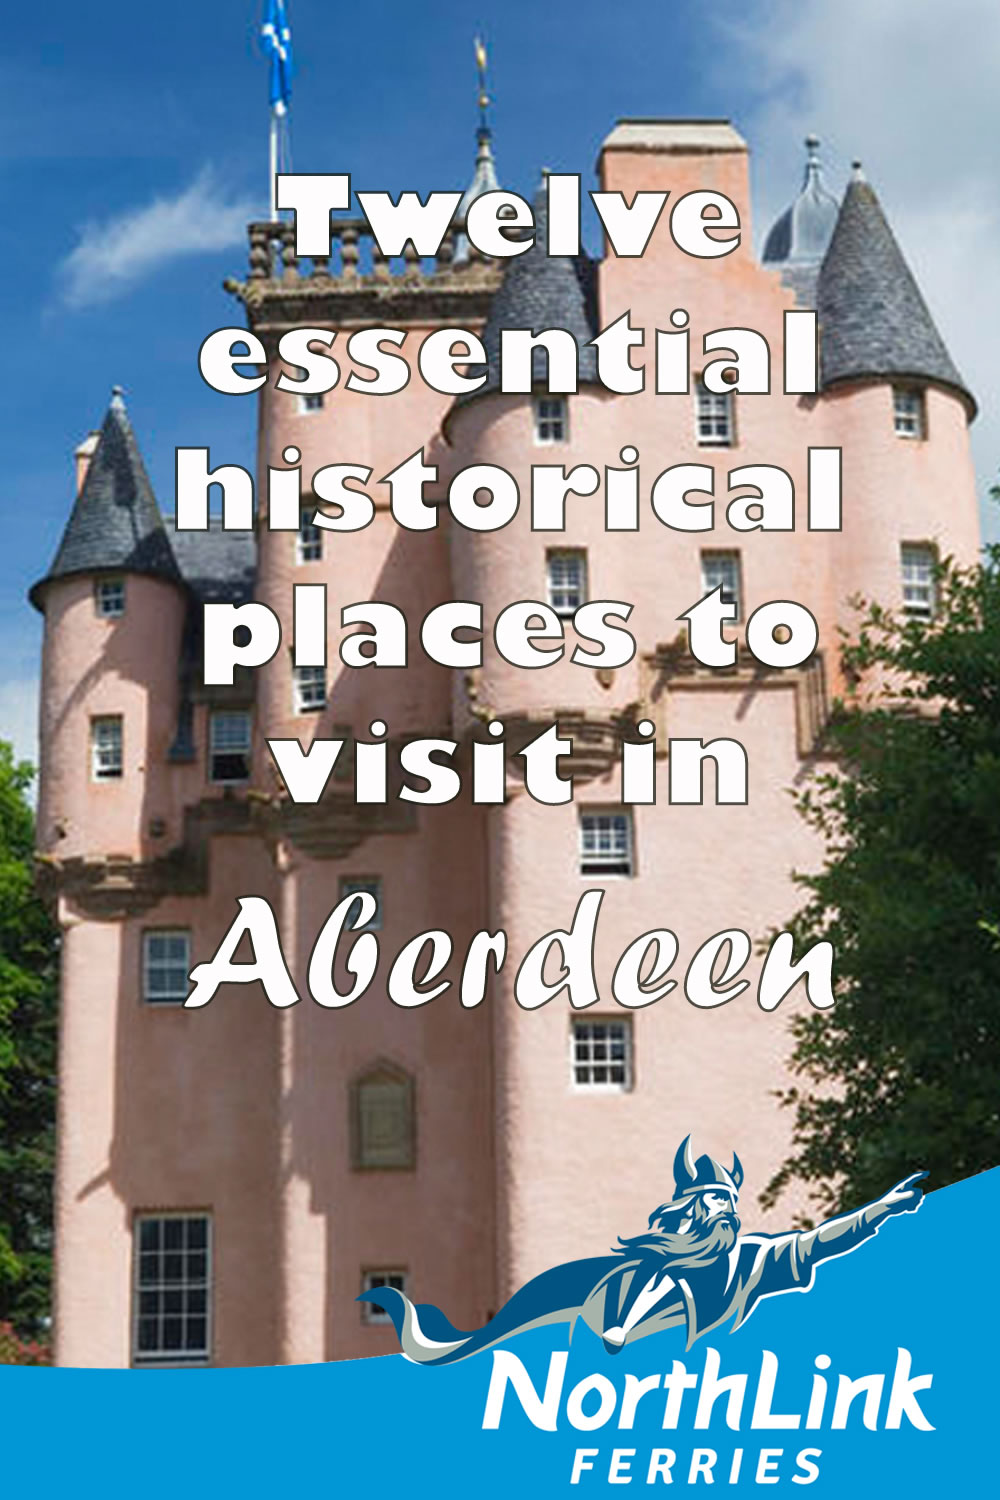 Twelve essential historical places to visit in Aberdeen